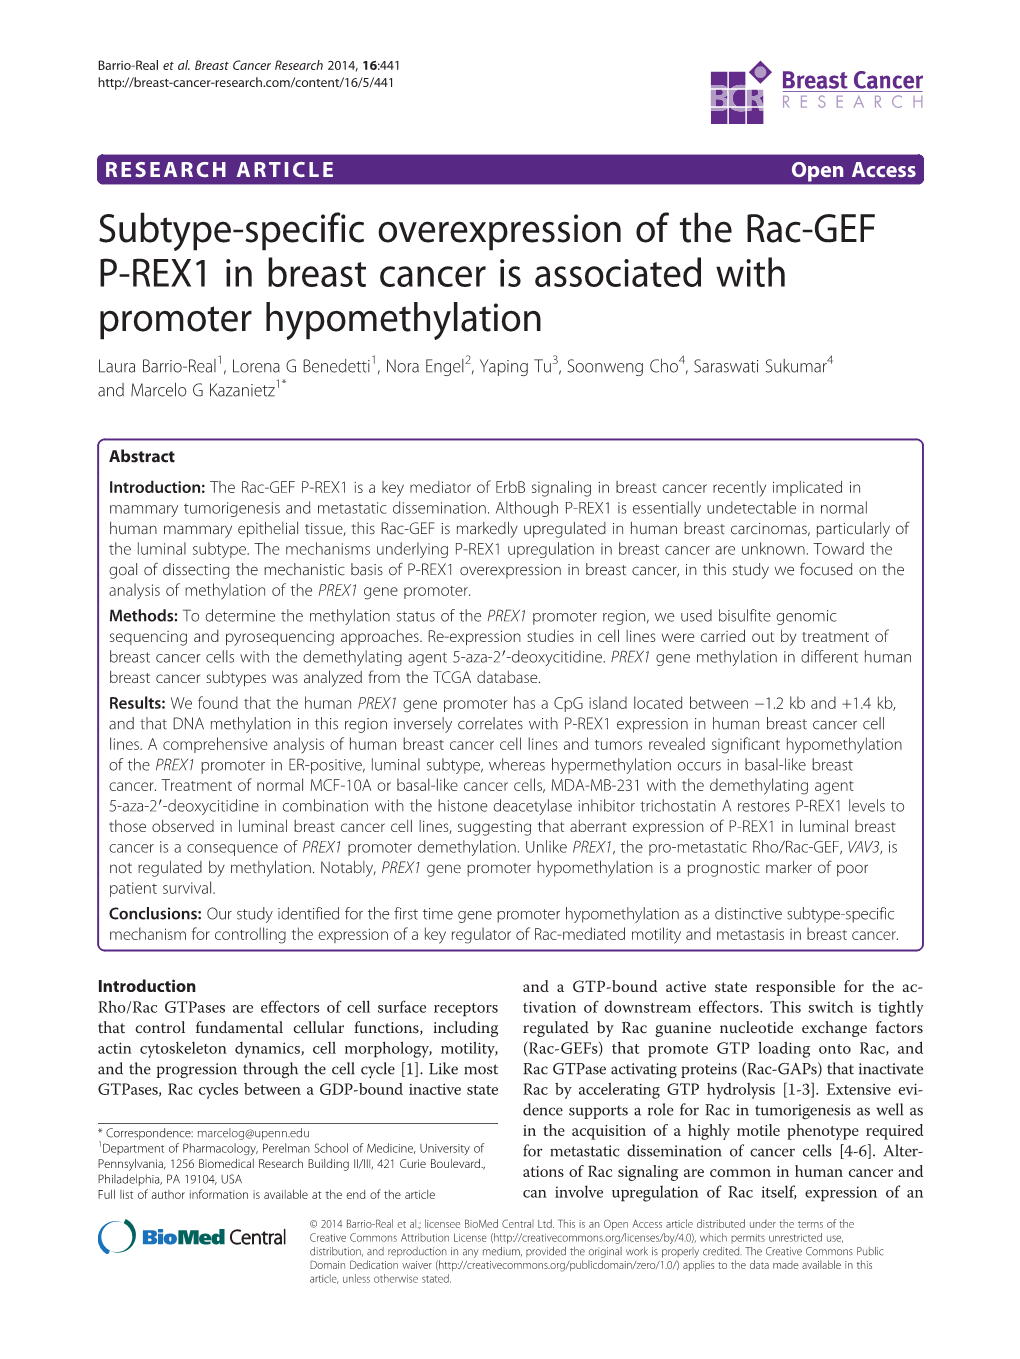 Subtype-Specific Overexpression of the Rac-GEF P-REX1 in Breast